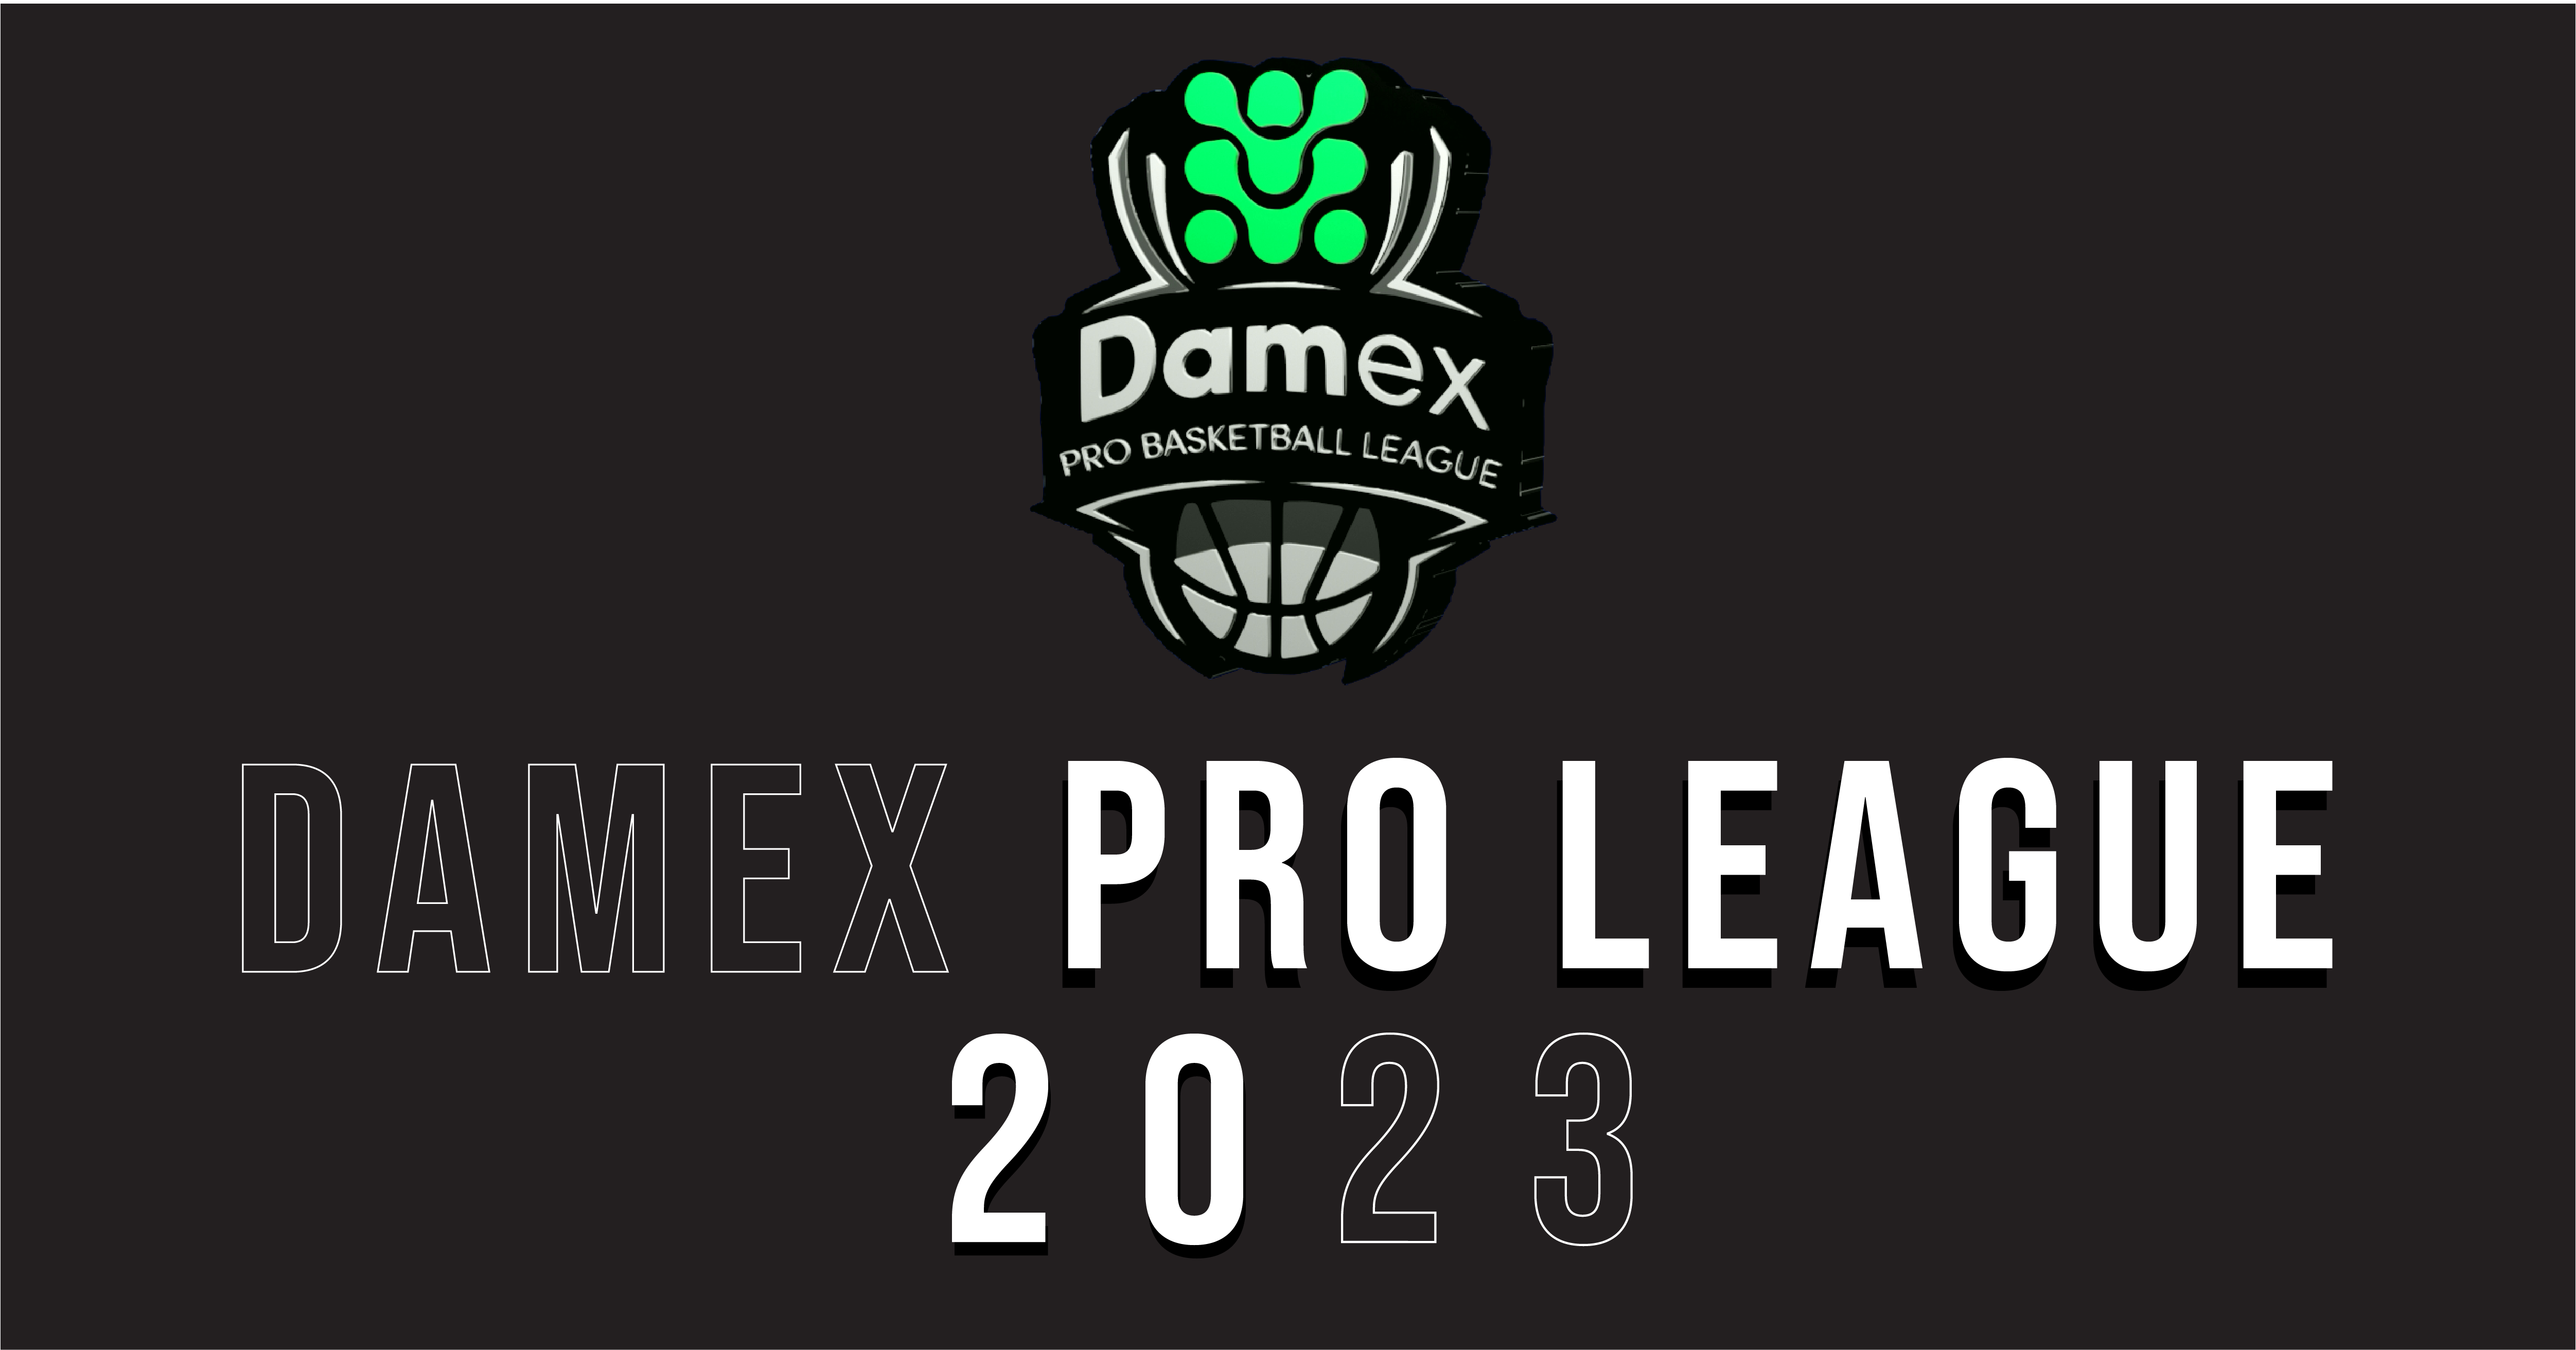 The Damex Pro Basketball League is back – bigger and better